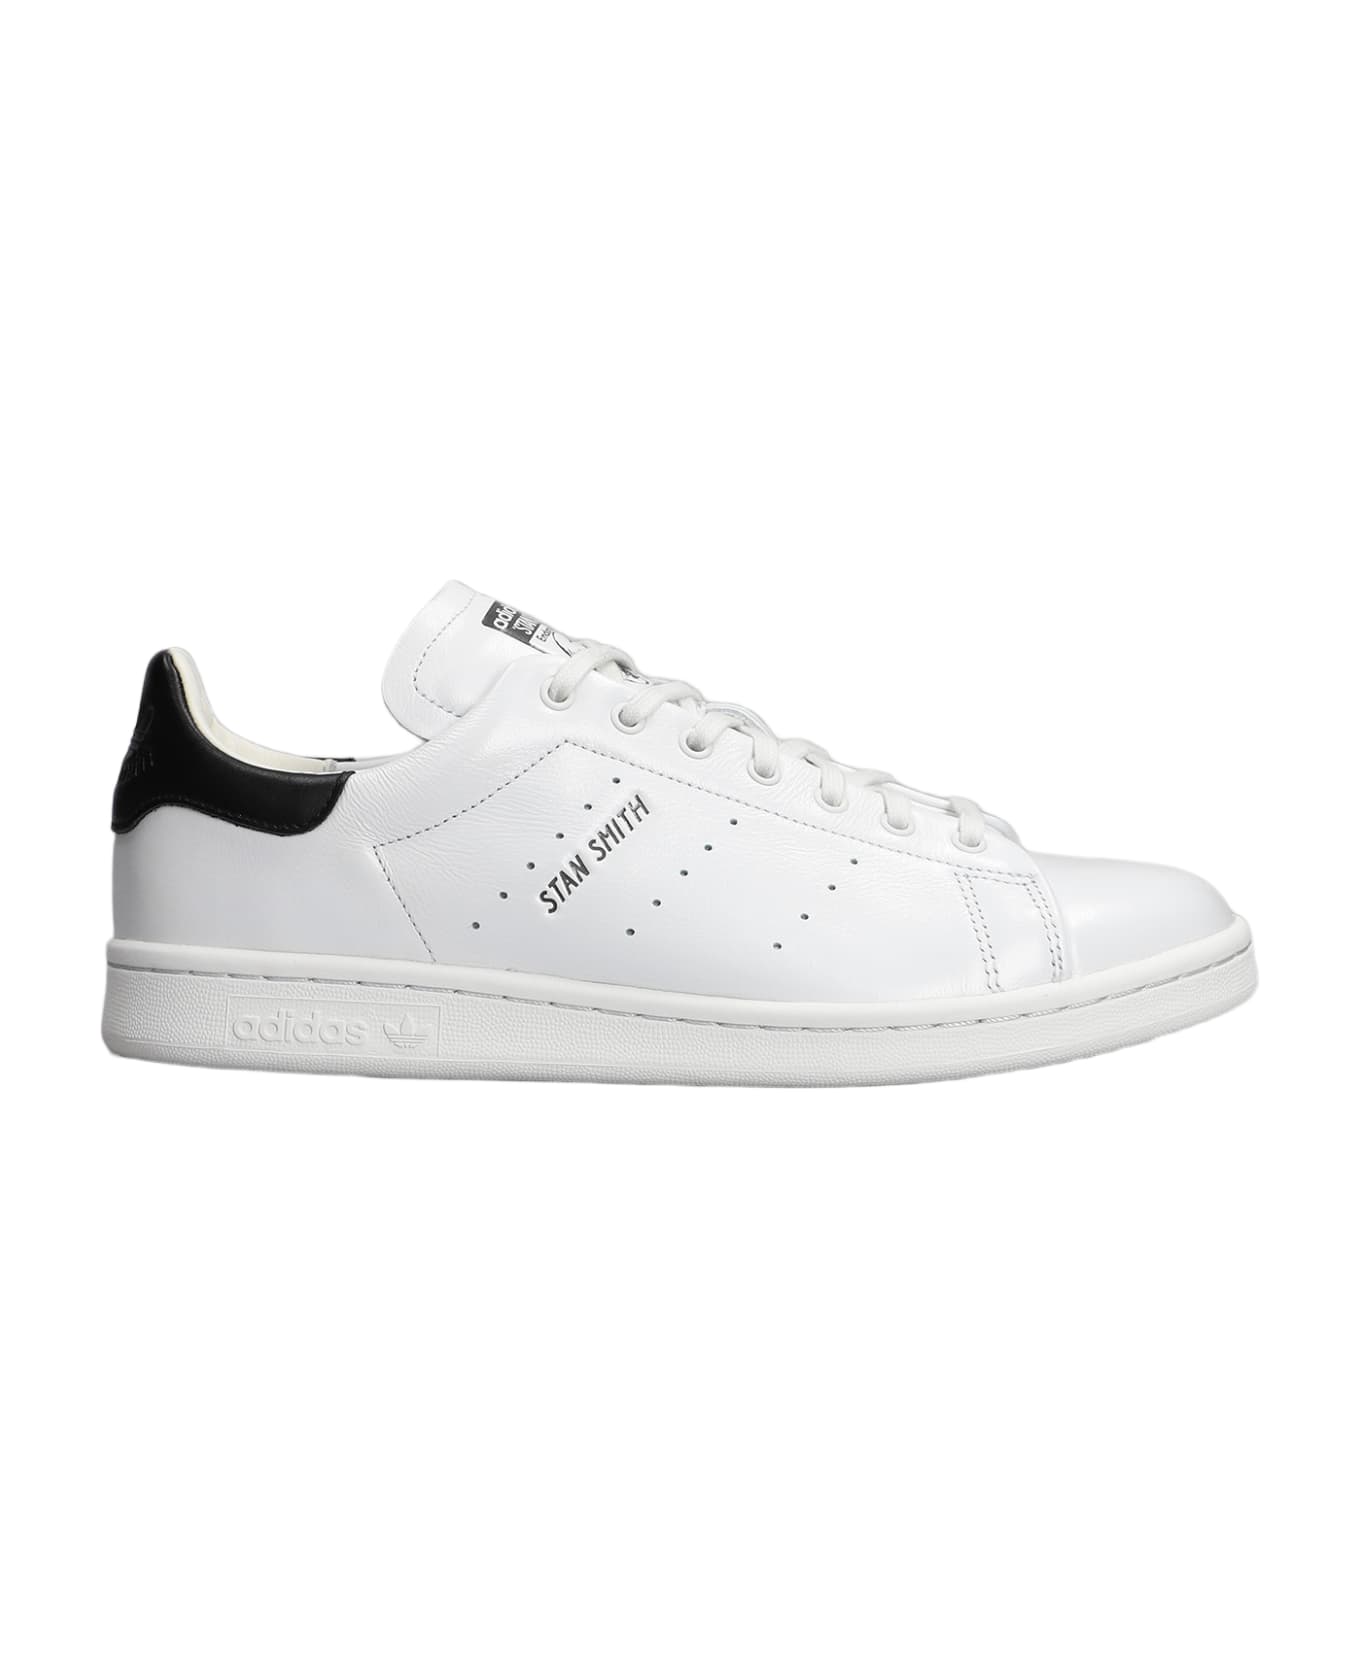 Adidas Stan Smith Lux Sneakers In White Leather - WHITE スニーカー